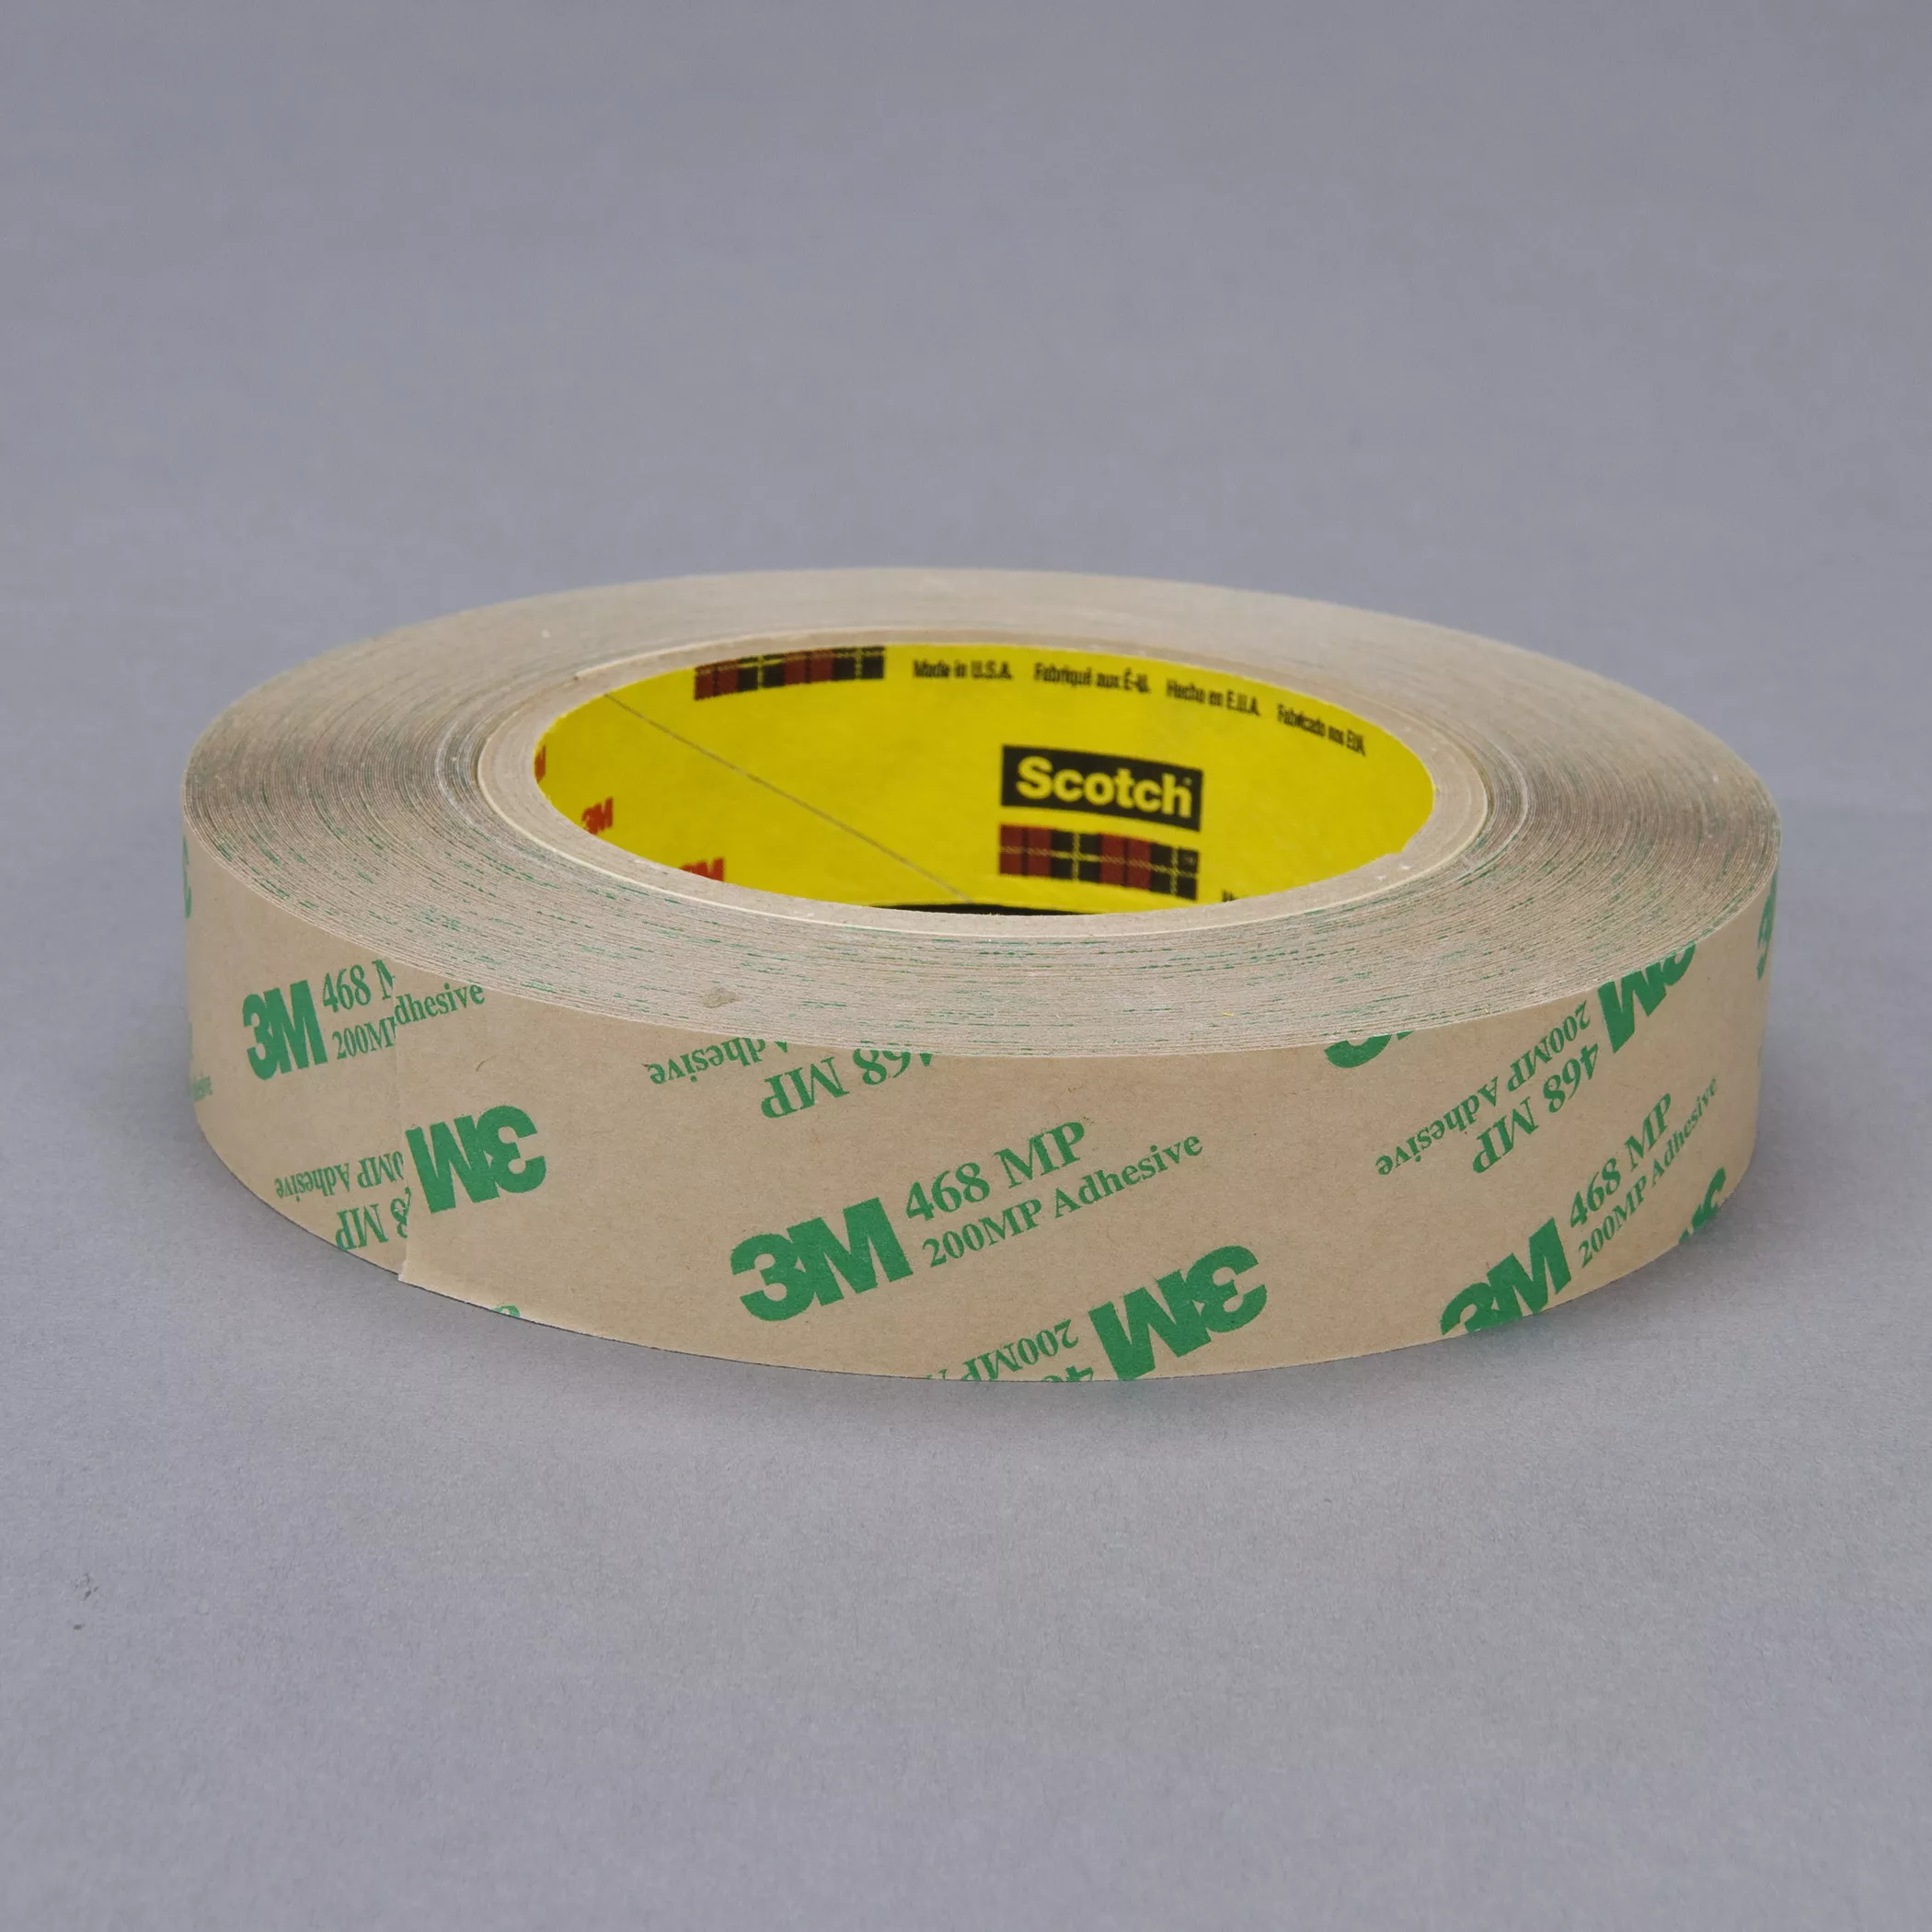 3M™ Adhesive Transfer Tape 468MP, Clear, 6 in x 60 yd, 5 mil, 8
Roll/Case